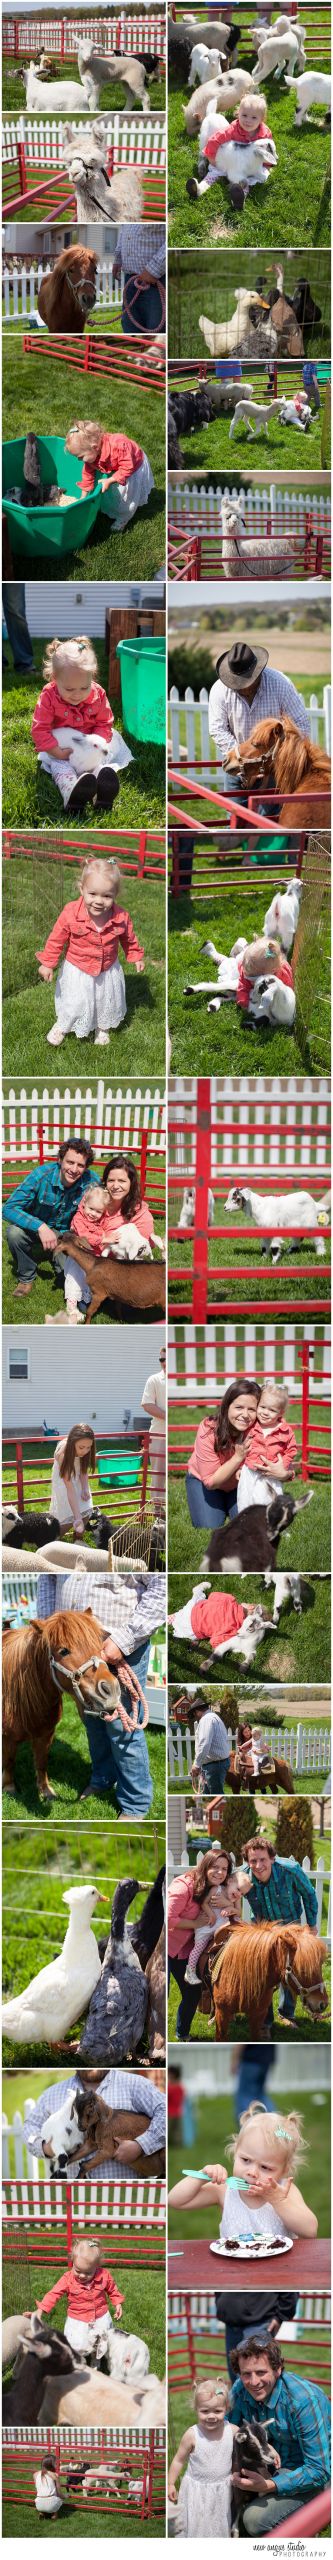 Petting Zoo Rental For Birthday Party
 Girly Petting Zoo Farm Themed birthday party 2 year old